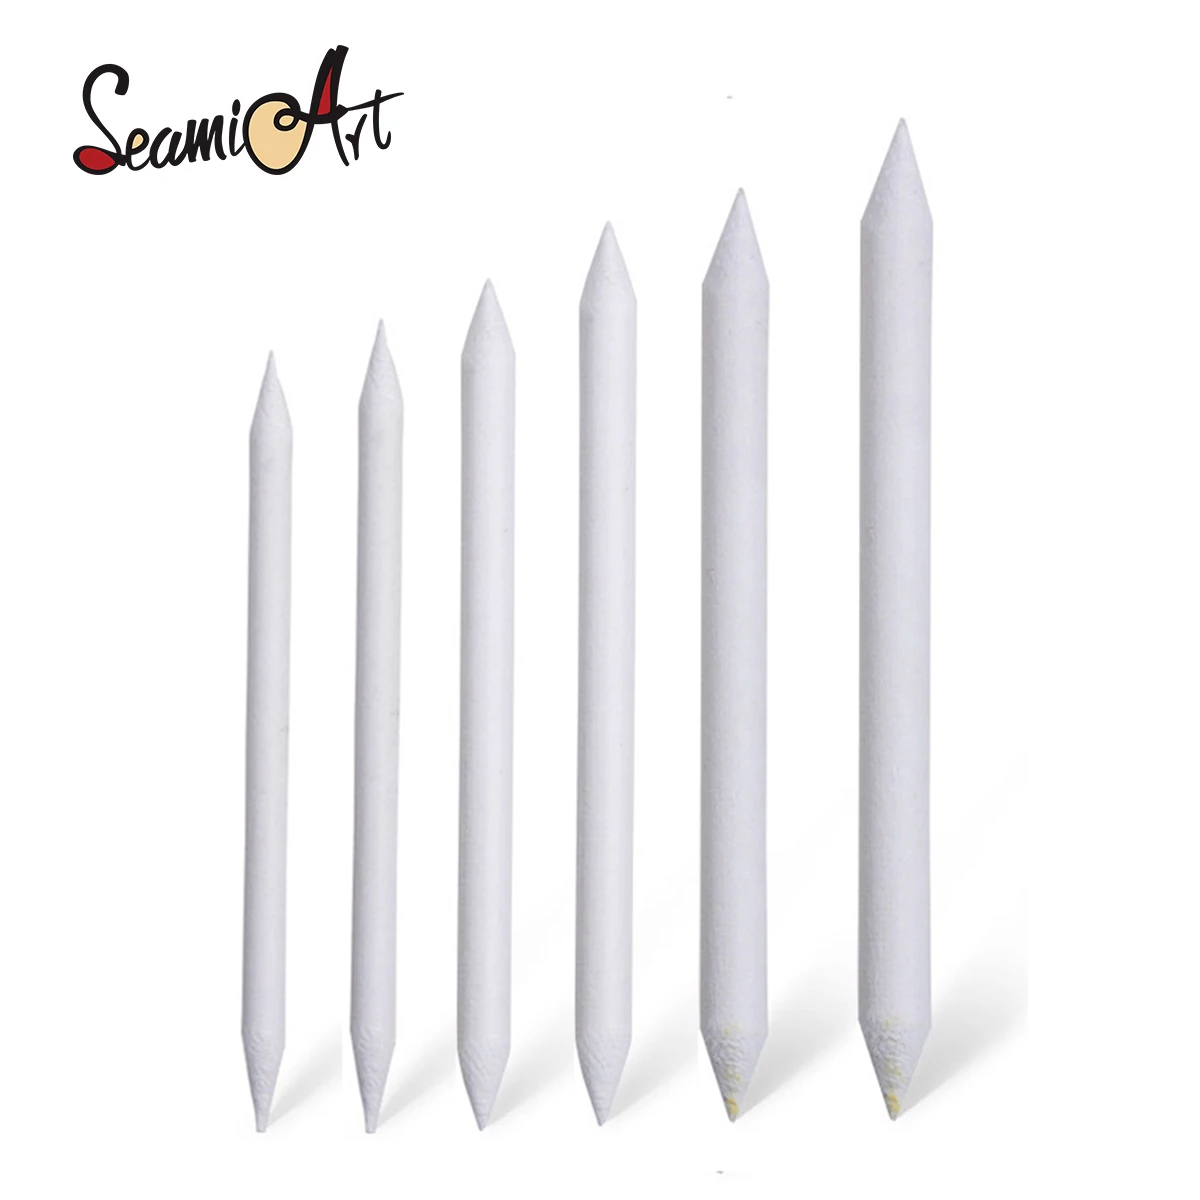 6pcs/set Blending Smudge Stump Stick Tortillon Sketch Art White Drawing Charcoal Sketcking Tool Rice Paper Pen Supplies stainless steel spatula palette nail art makeup mixing tool for blending colors different shapes school art supplies